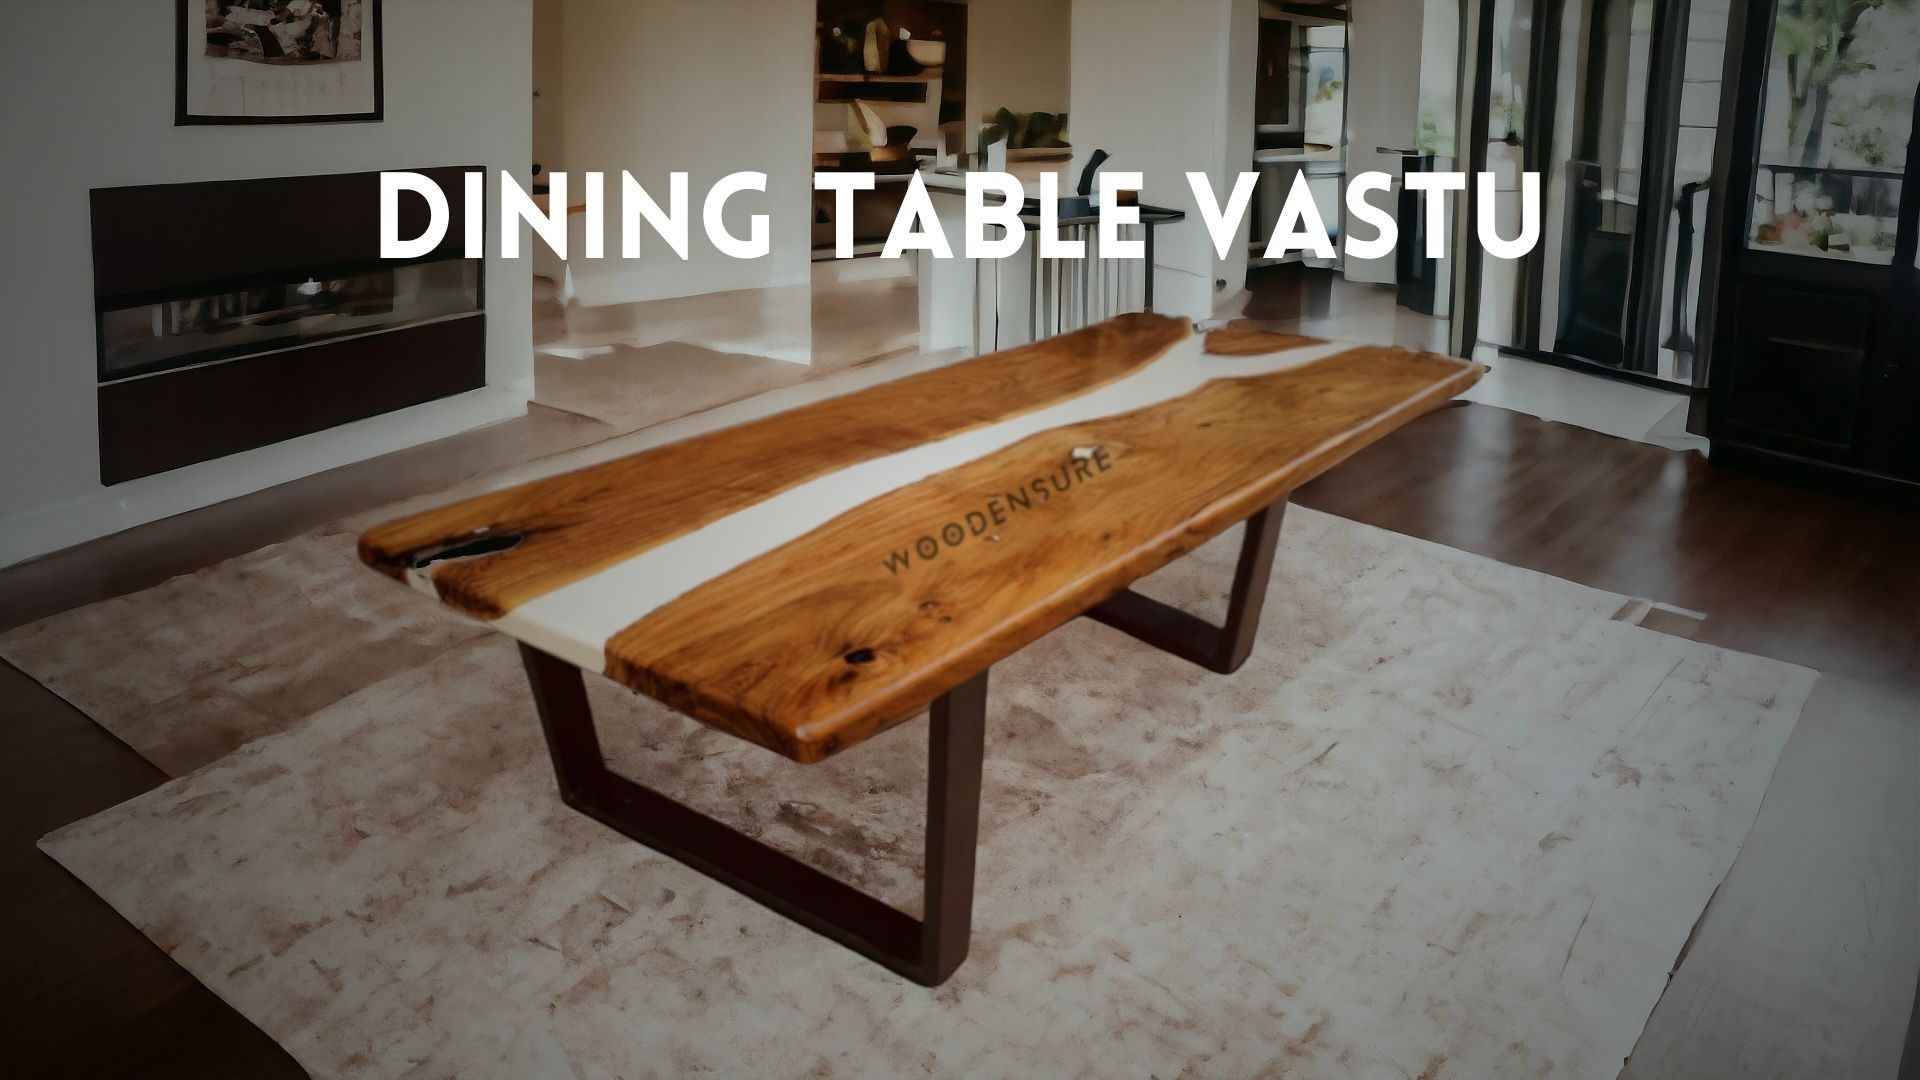 Harness Harmony at Mealtimes: How to Place Dining Table according to Vastu